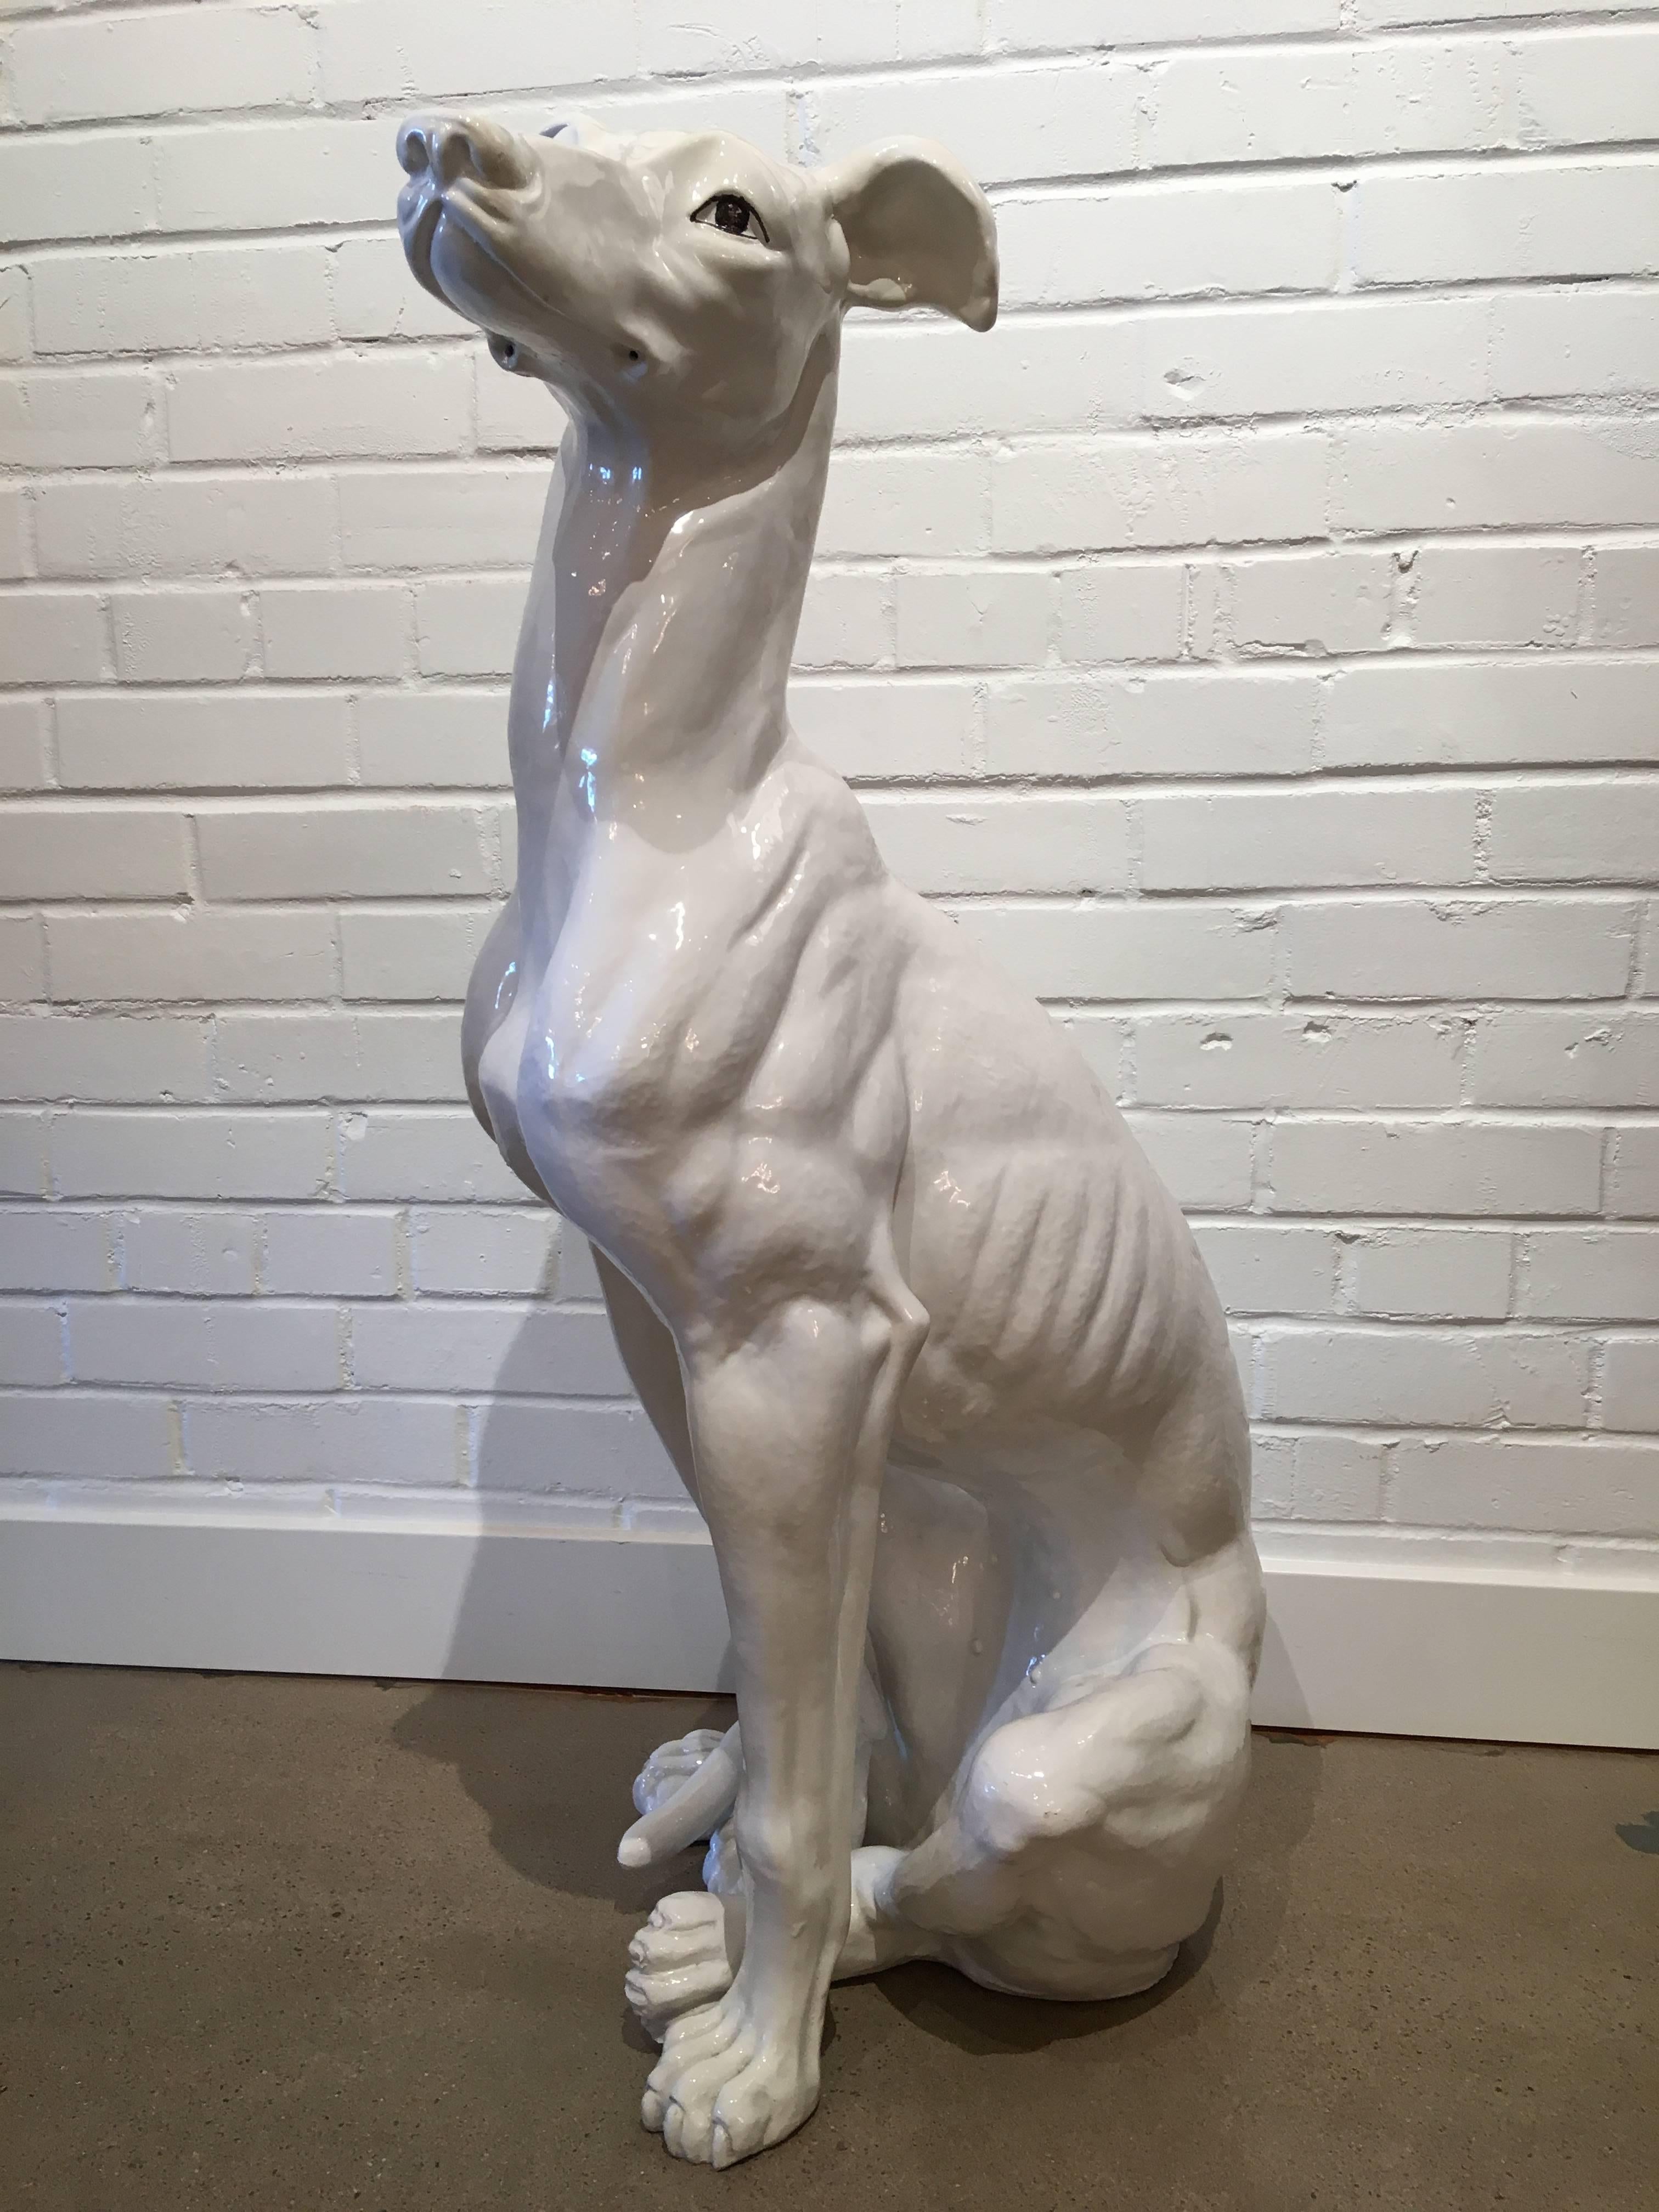 Regal and elegant, this ceramic greyhound will take centre stage in any space.